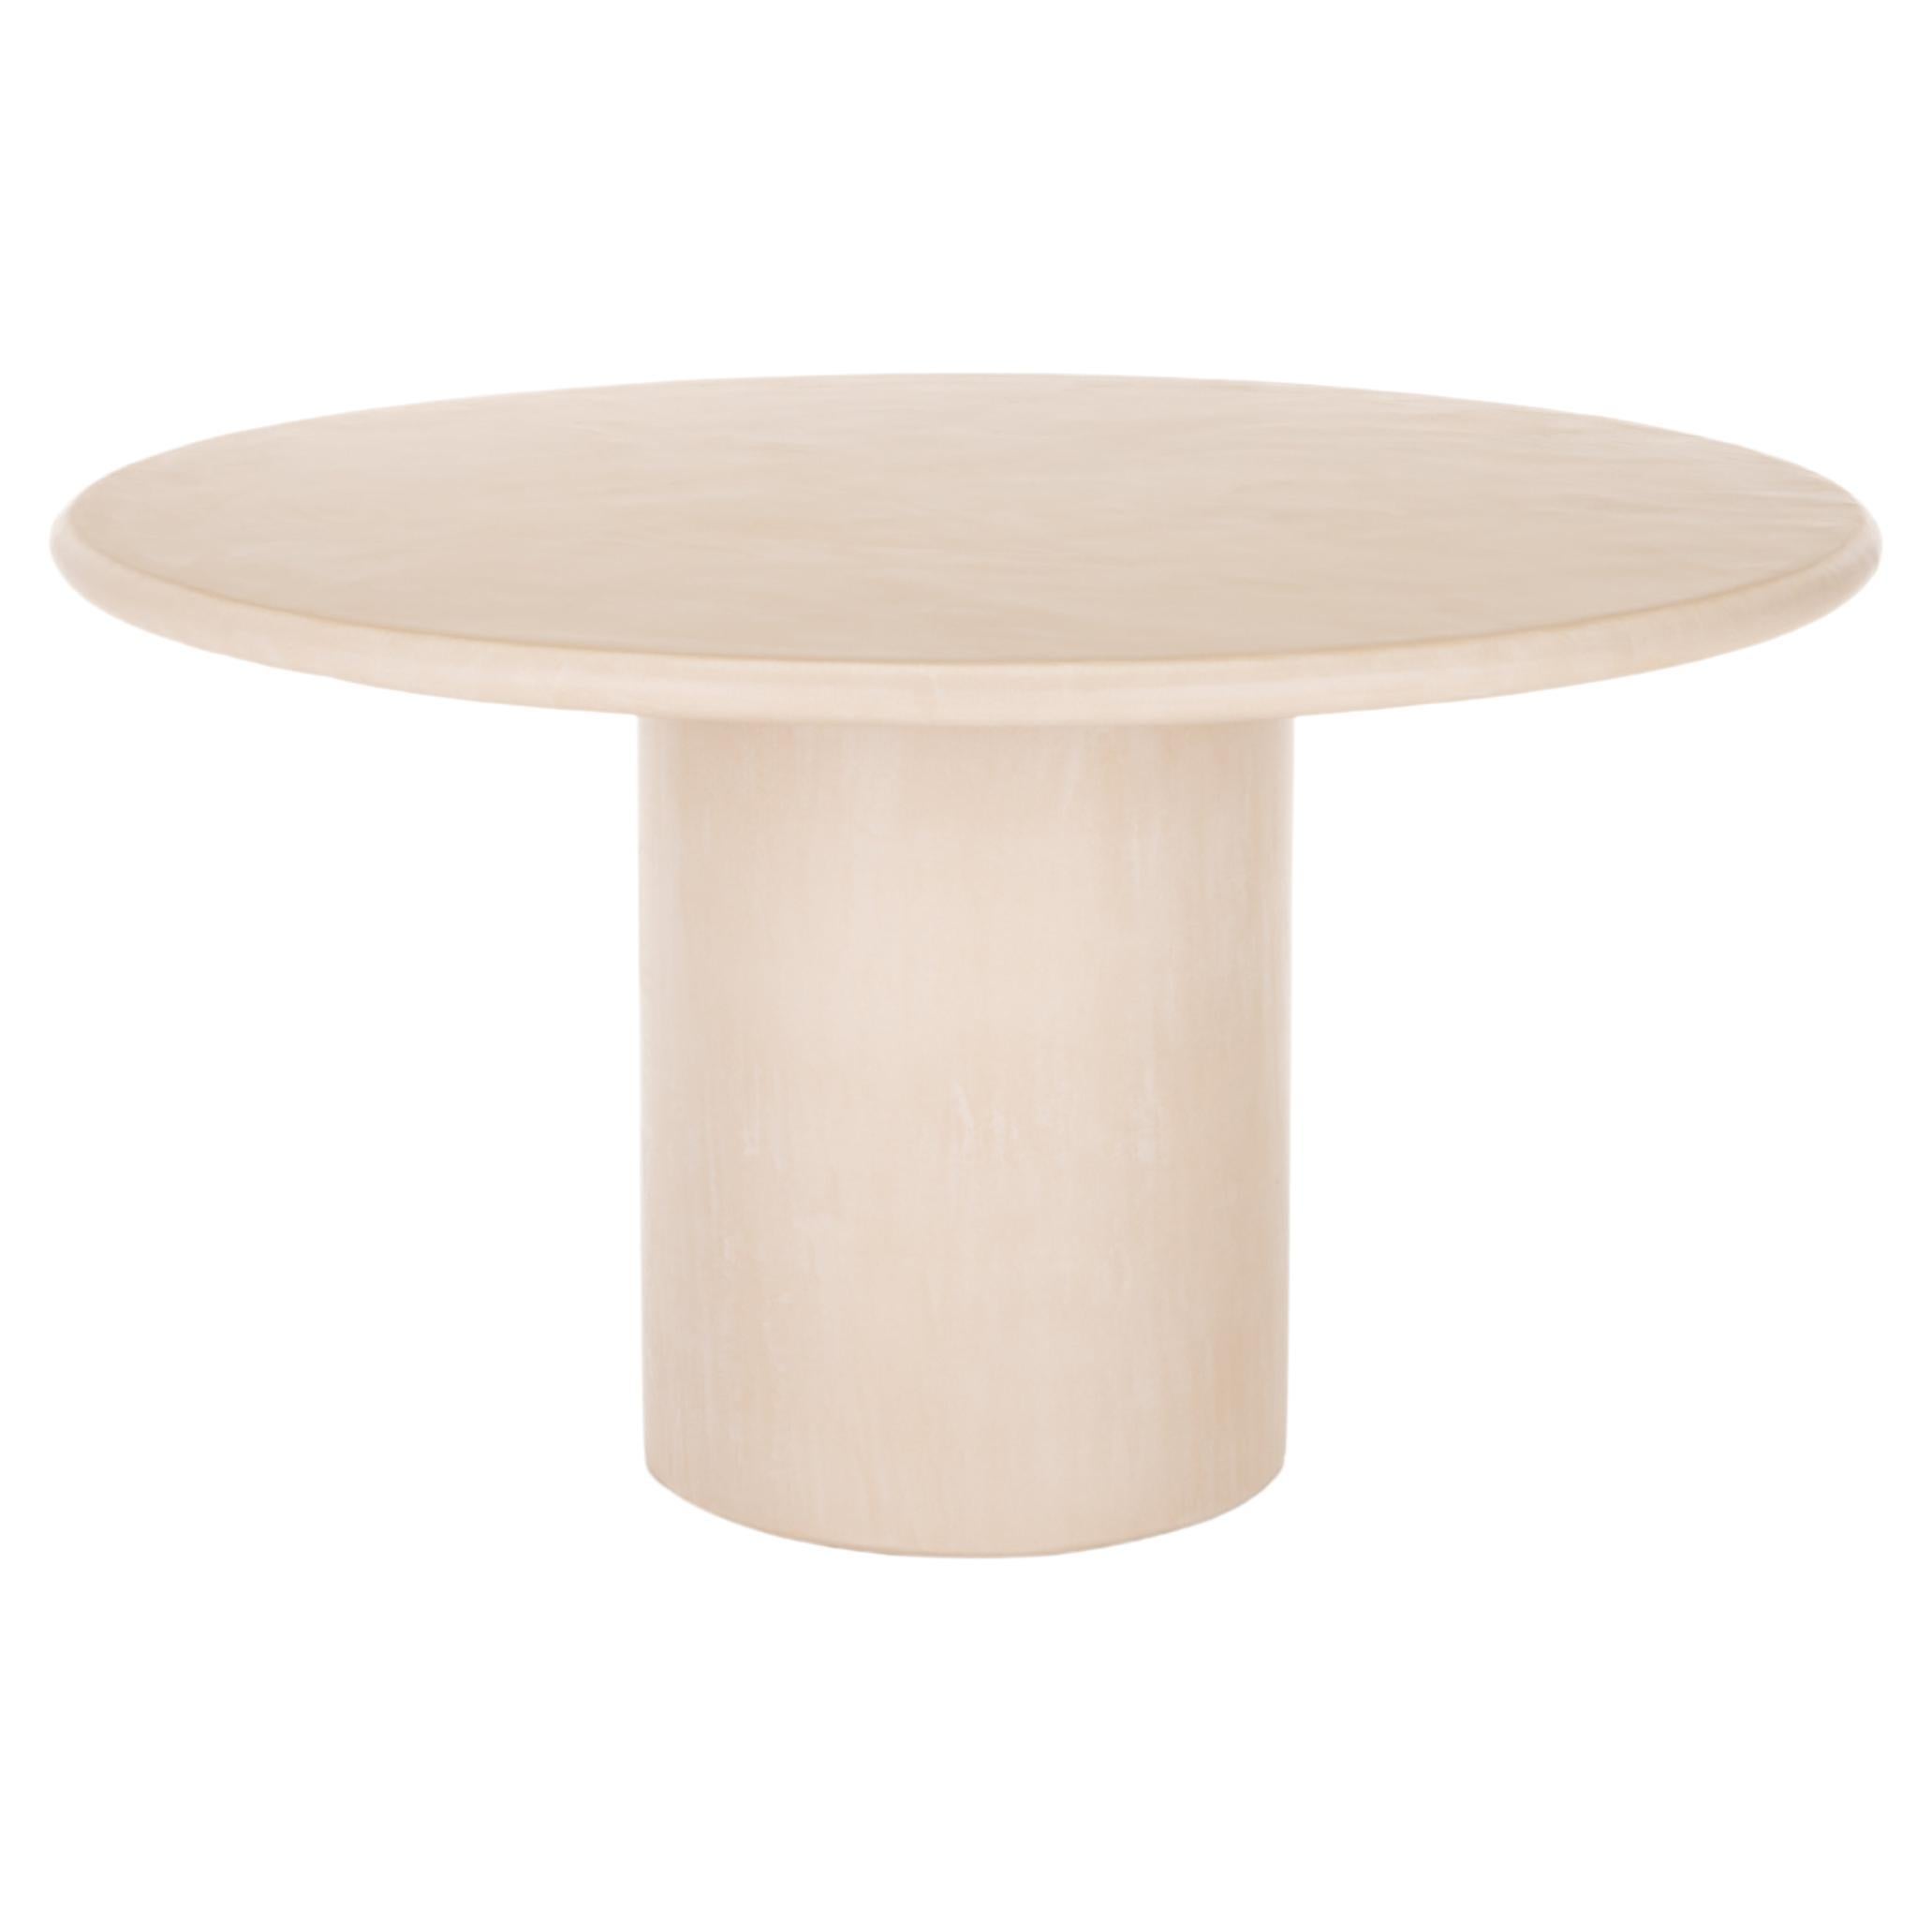 Natural Plaster Dining Table "Column" 140 by Isabelle Beaumont